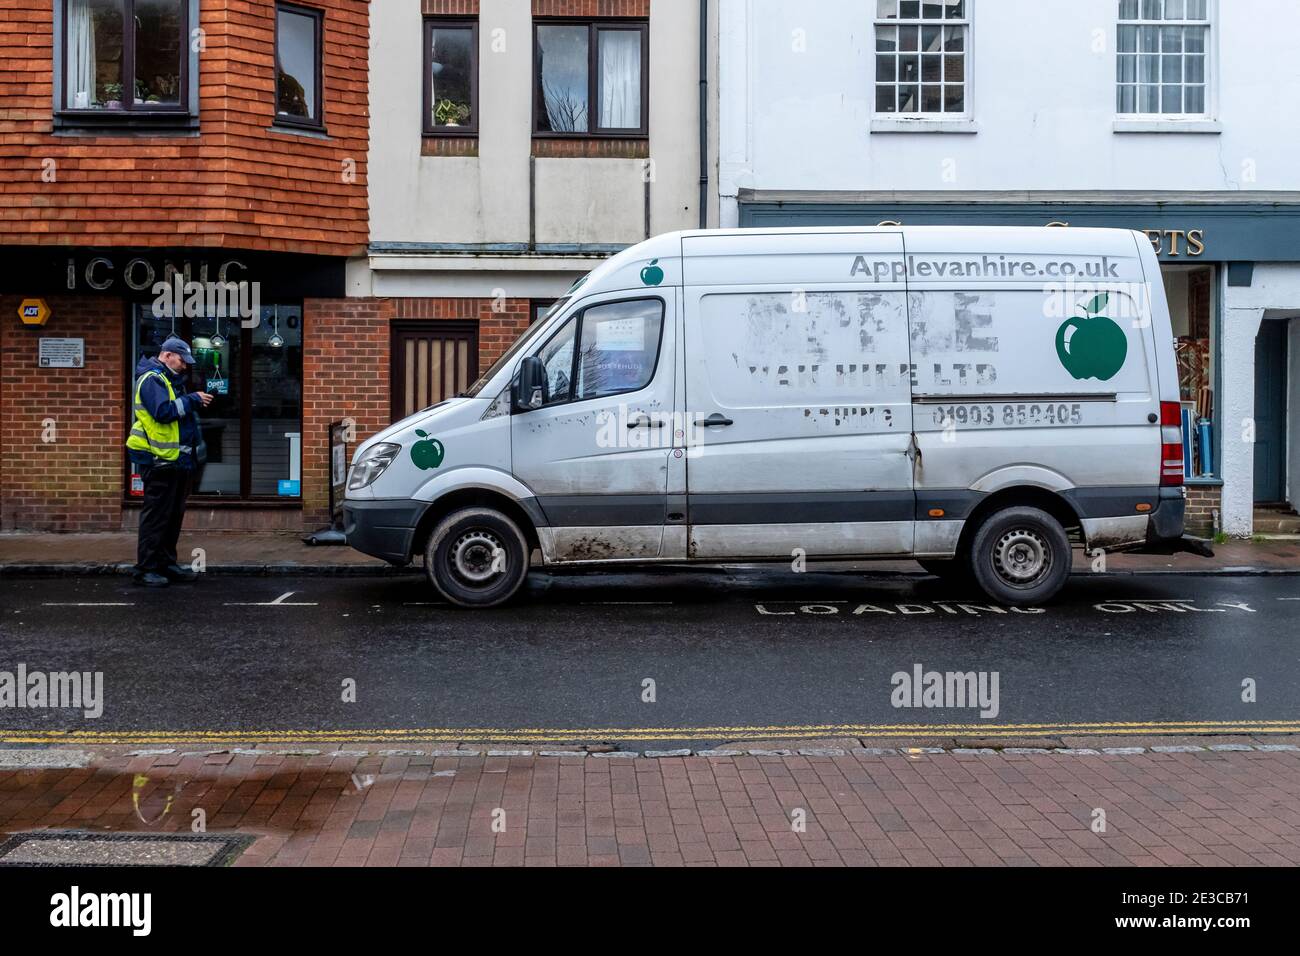 A Traffic Warden Gives A Parking Ticket To A Van On The High Street, Lewes, Sussex, UK. Stock Photo